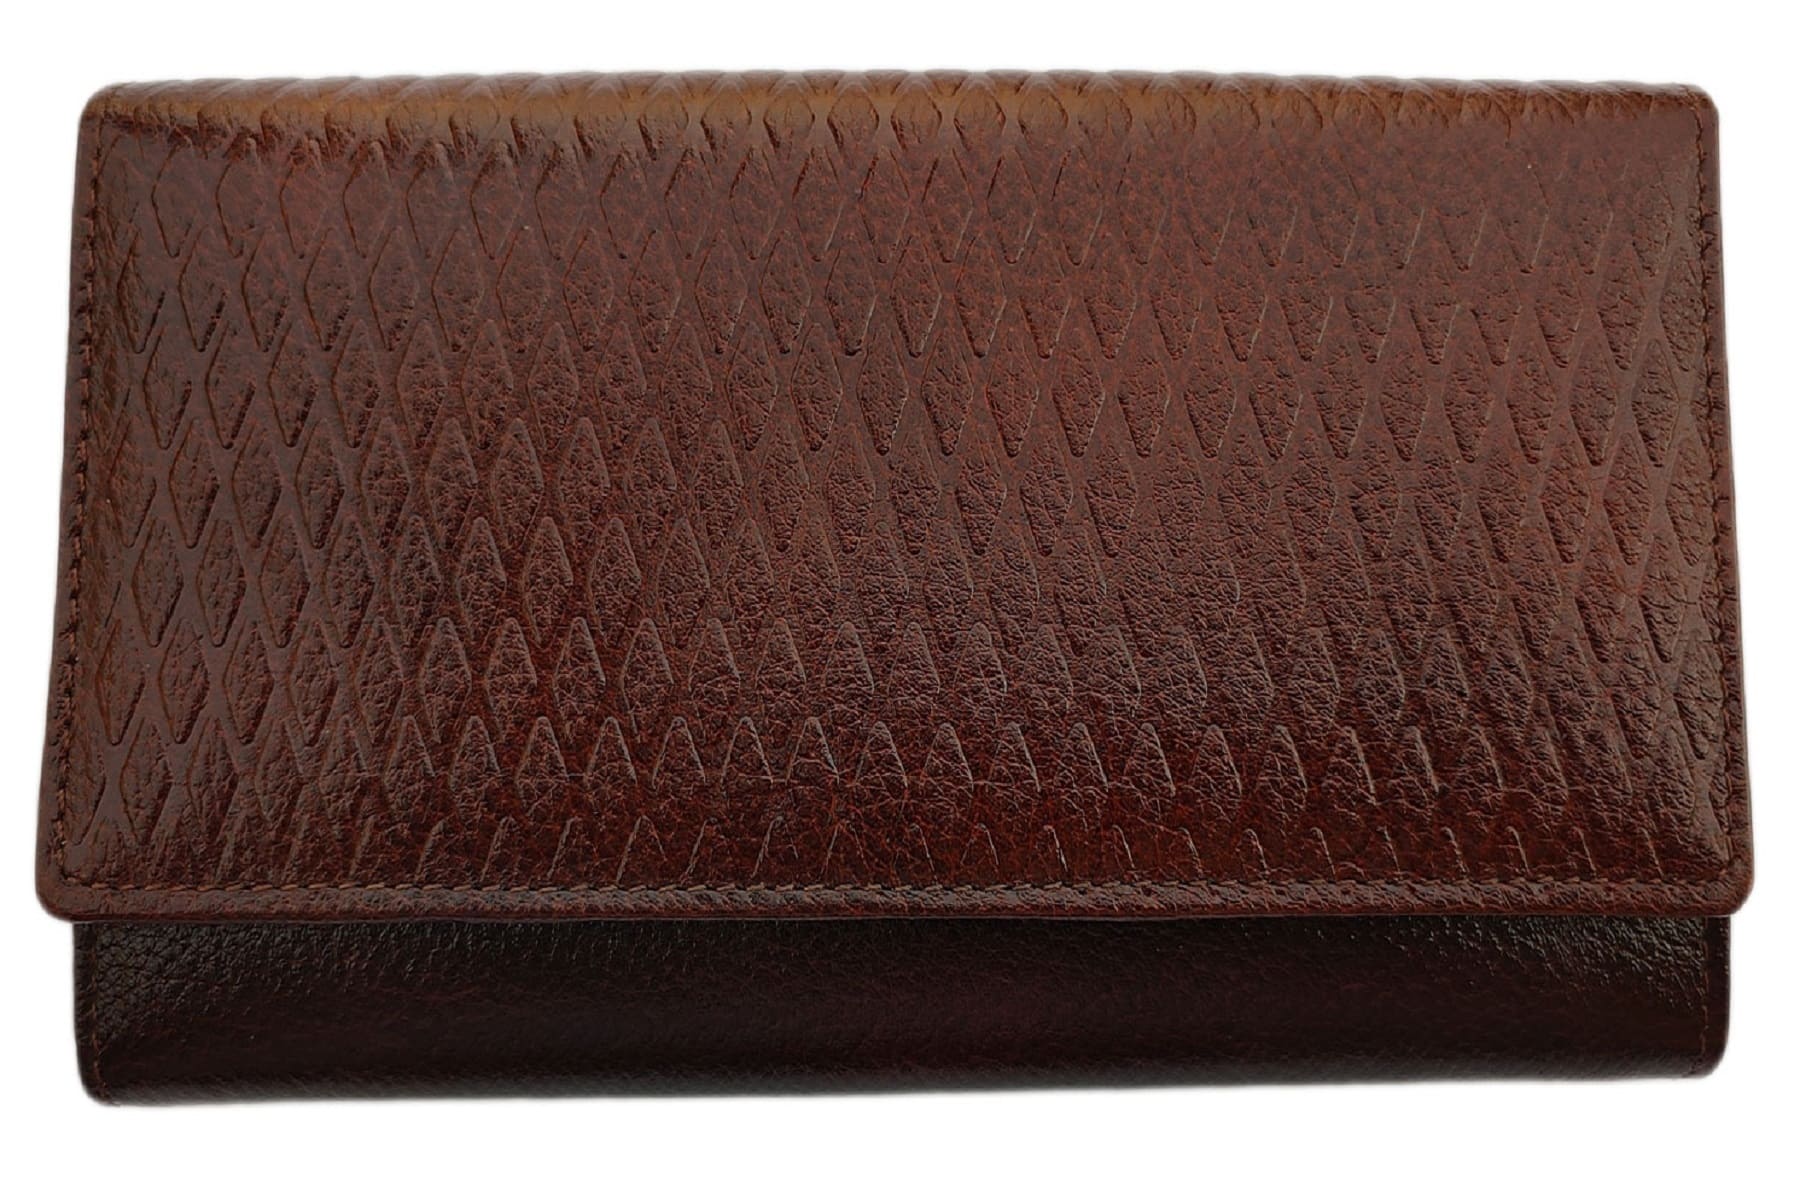 Vhaan Approved Pure Leather Ladies Clutch Purse with Flip Cover